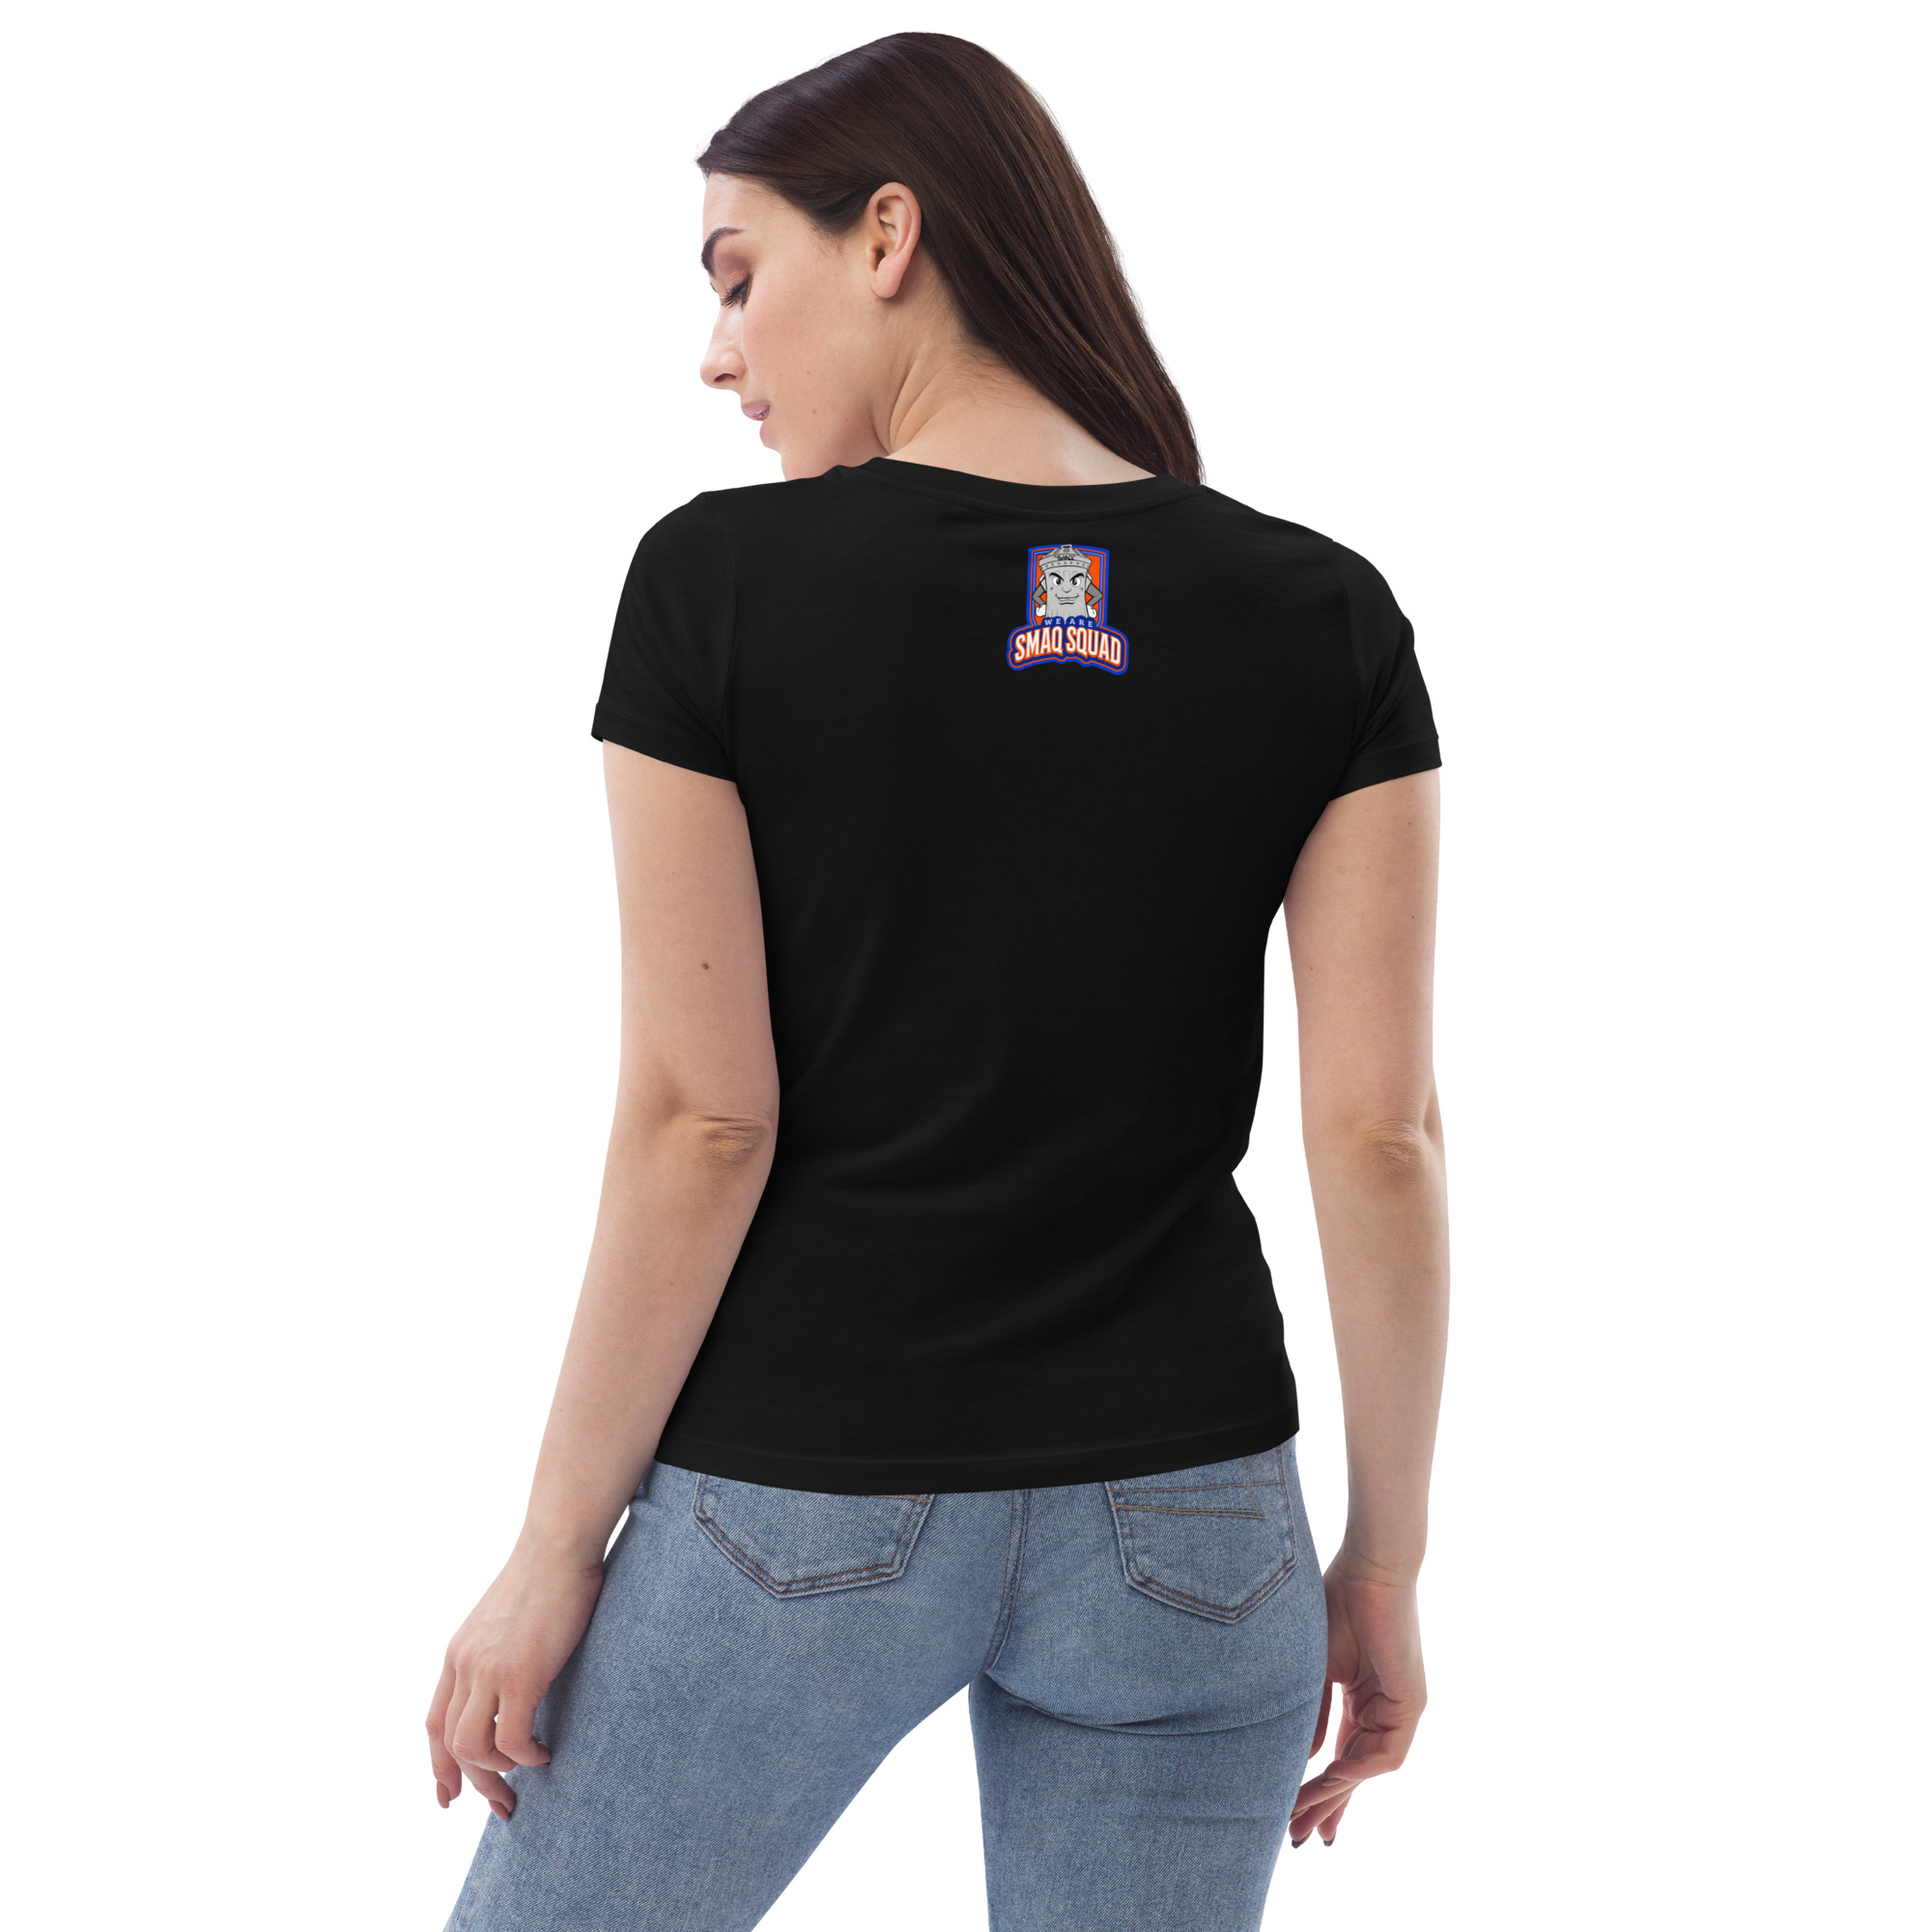 Women’s fitted eco tee